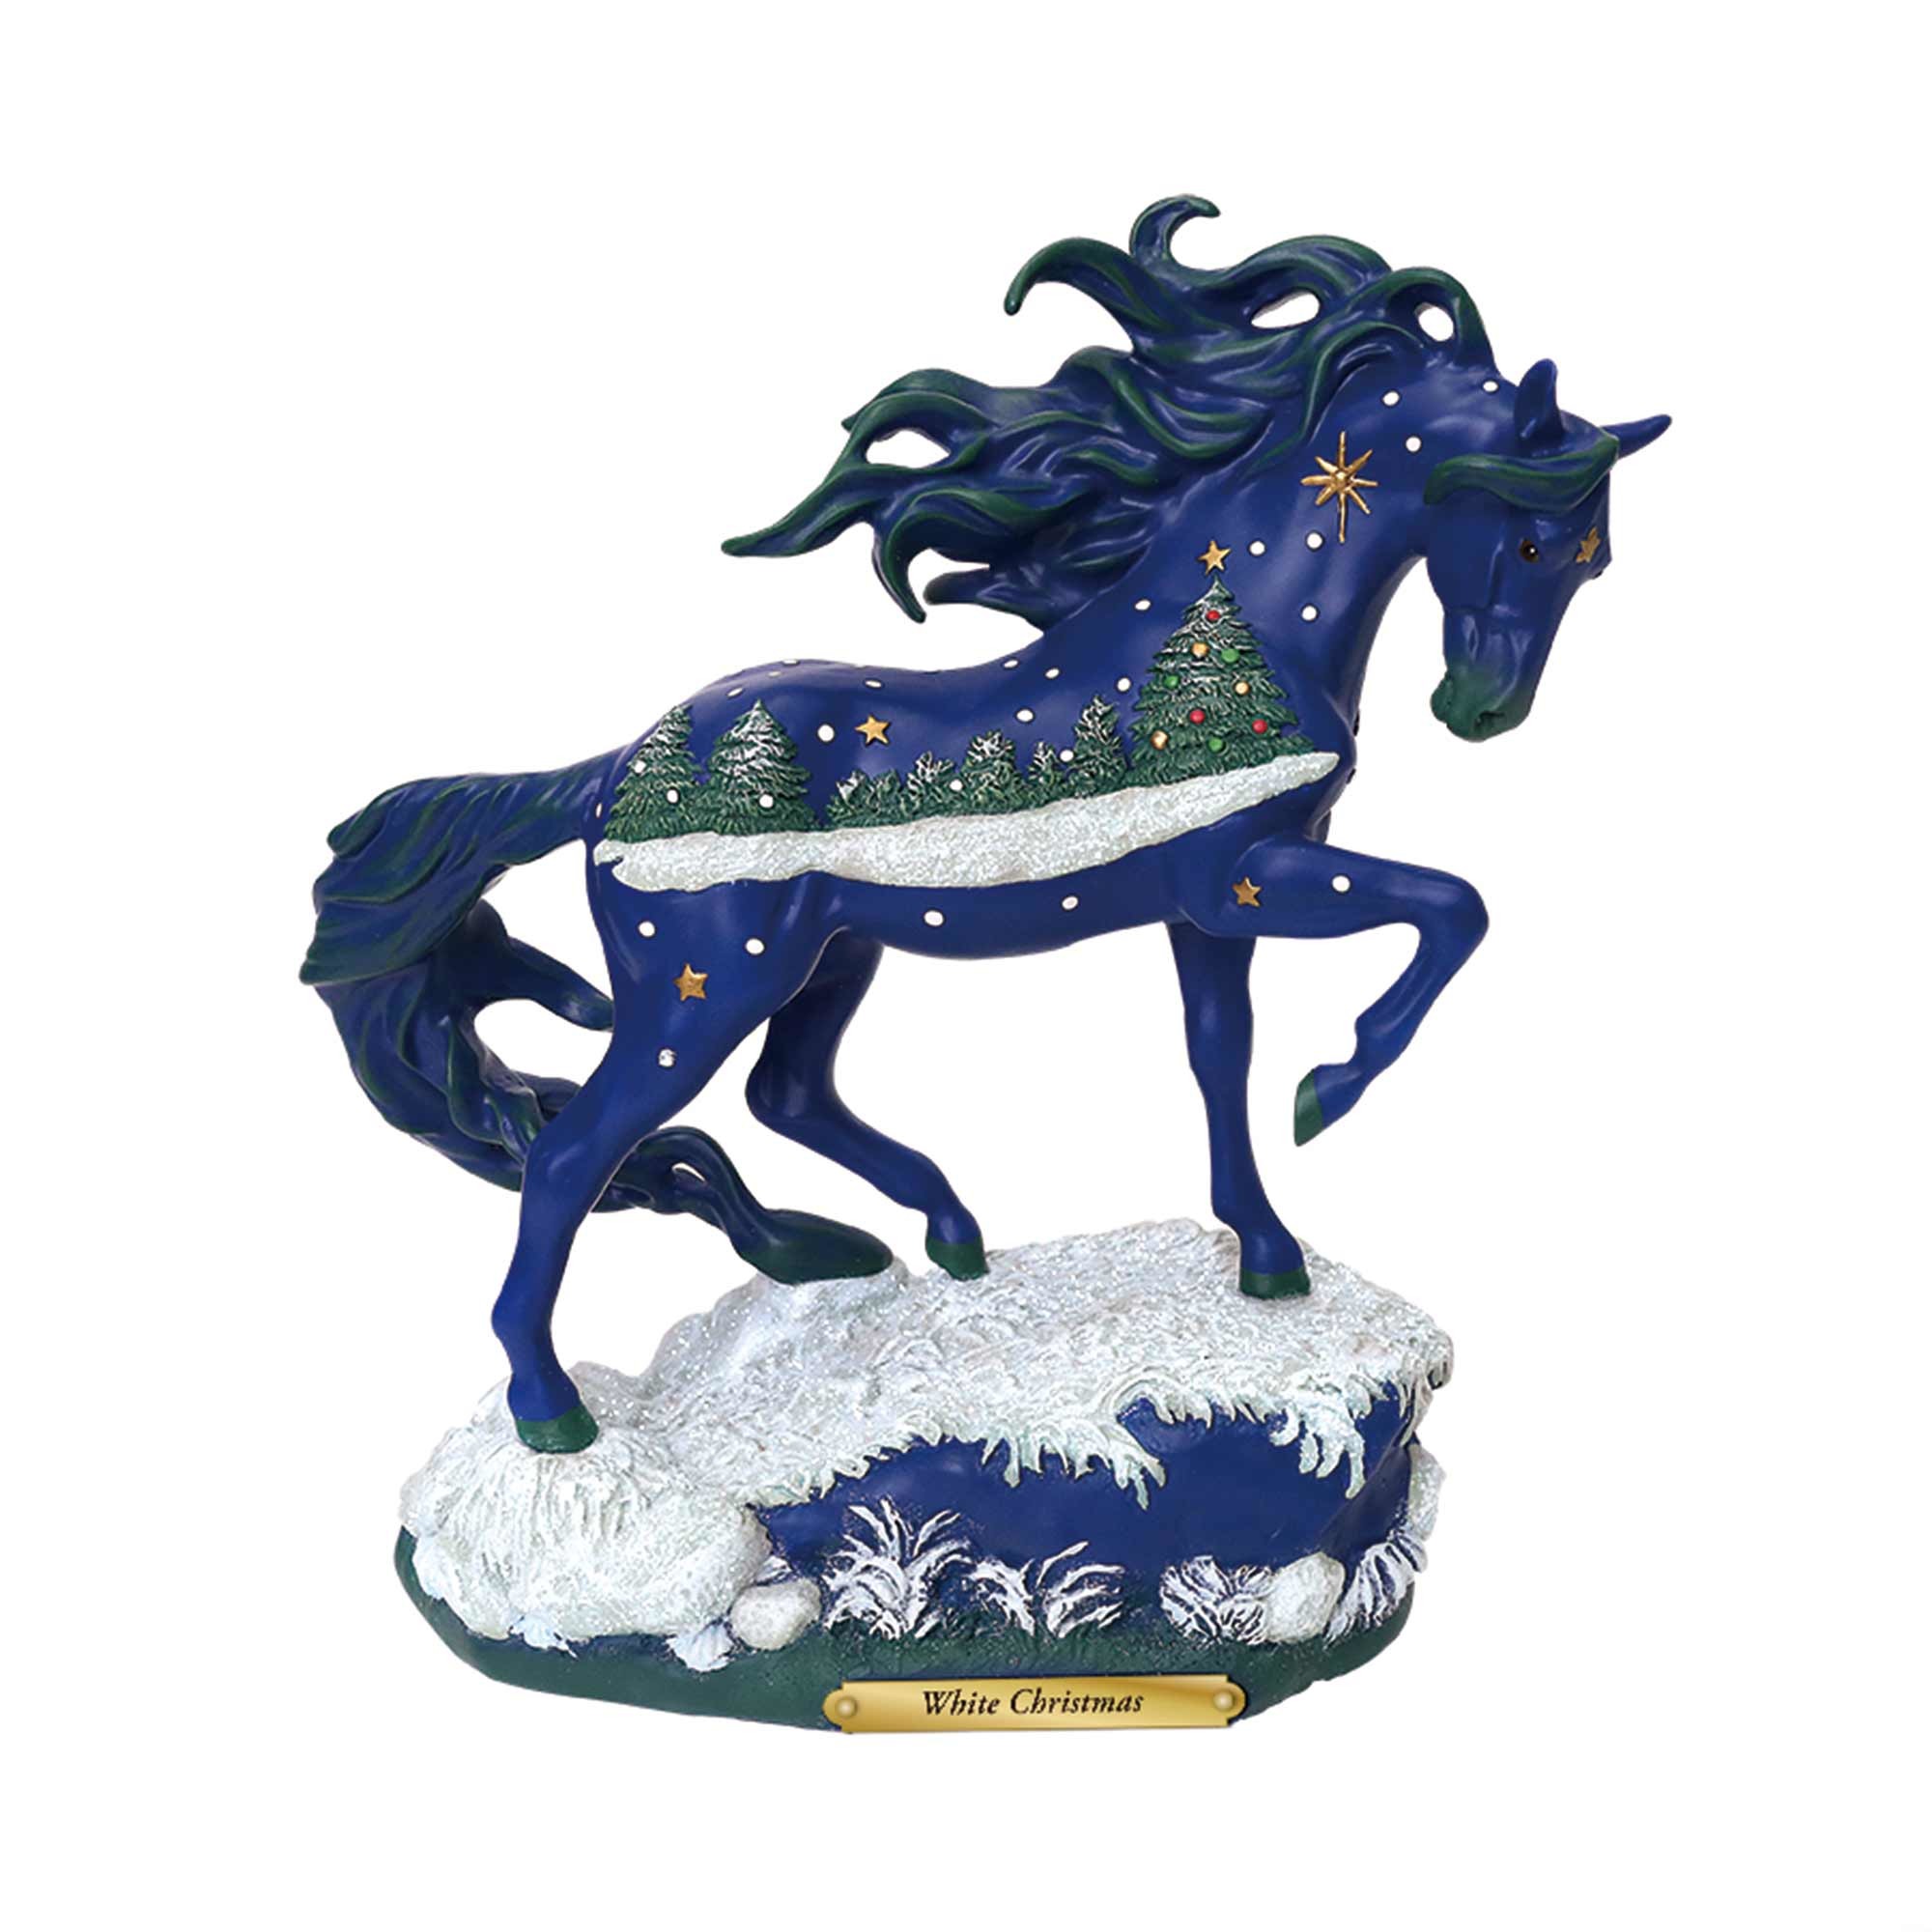 TRAIL PAINTED PONY 6001110 Winter Christmas Figure